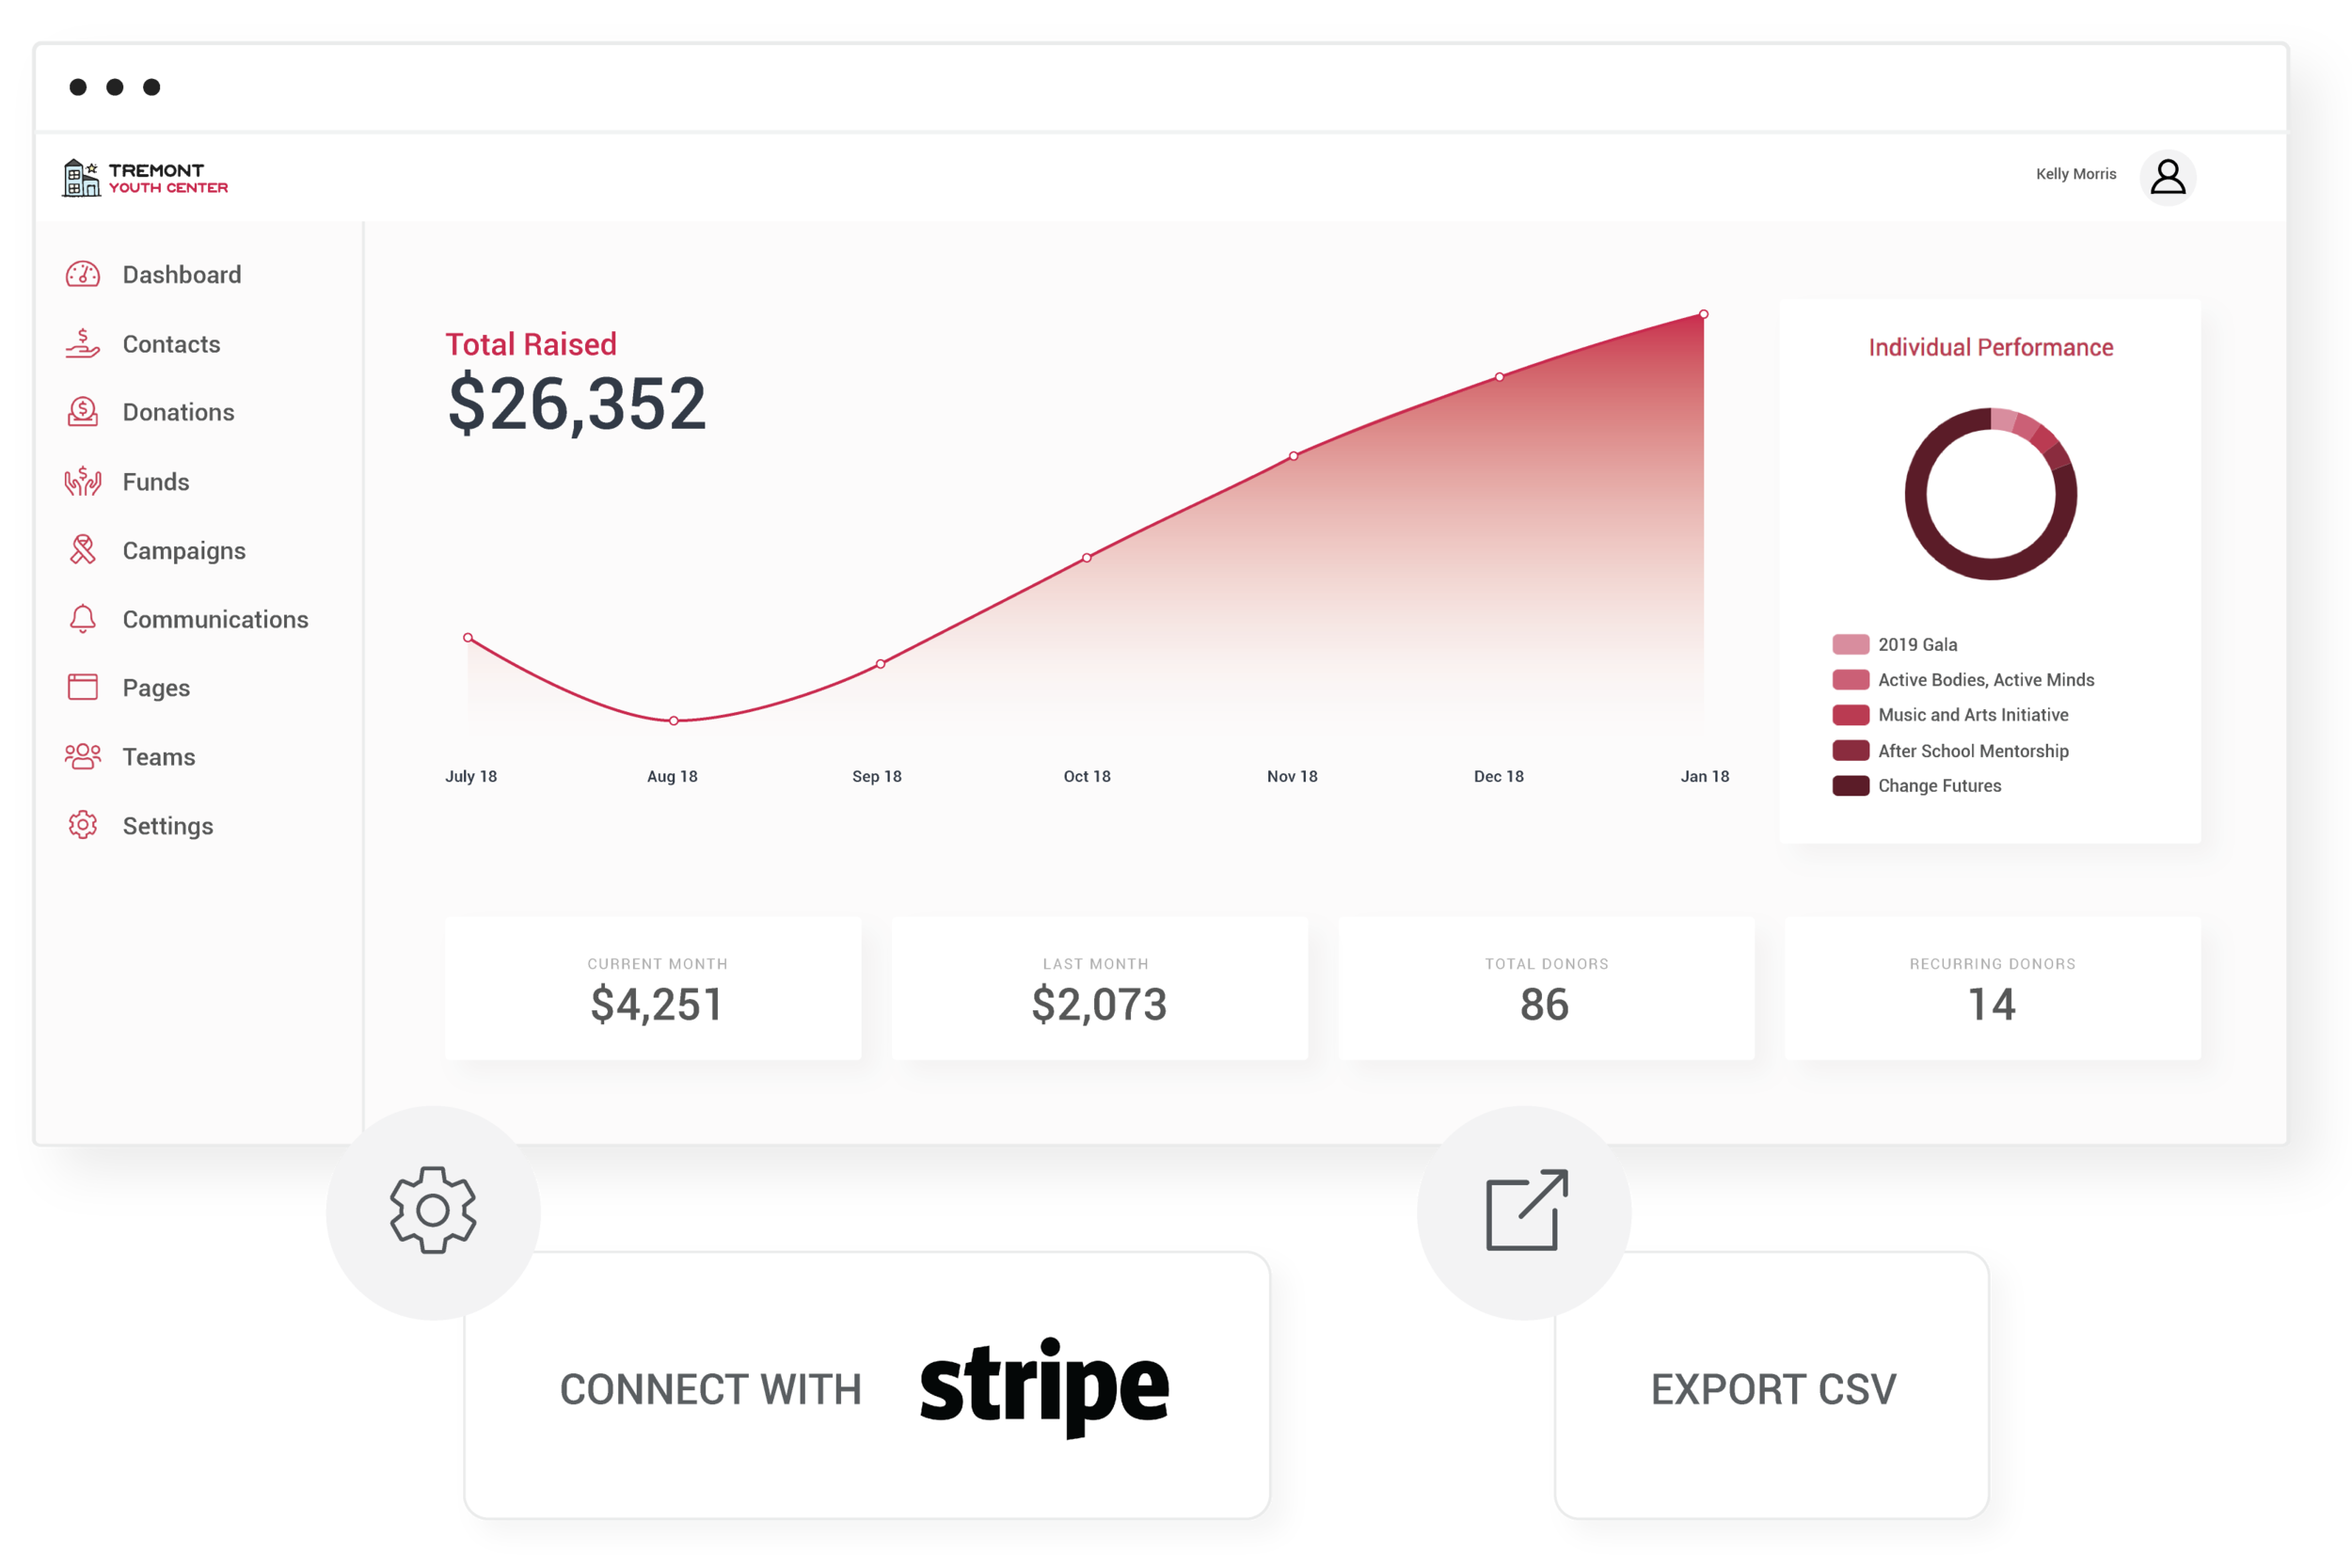 Tools and tracking at your fingertips - Manage donor data and track contributions from your CRM Dashboard. Connect a Stripe account to control your disbursement schedule and set up direct deposits. Spare change donors will receive automatic monthly gift statements.